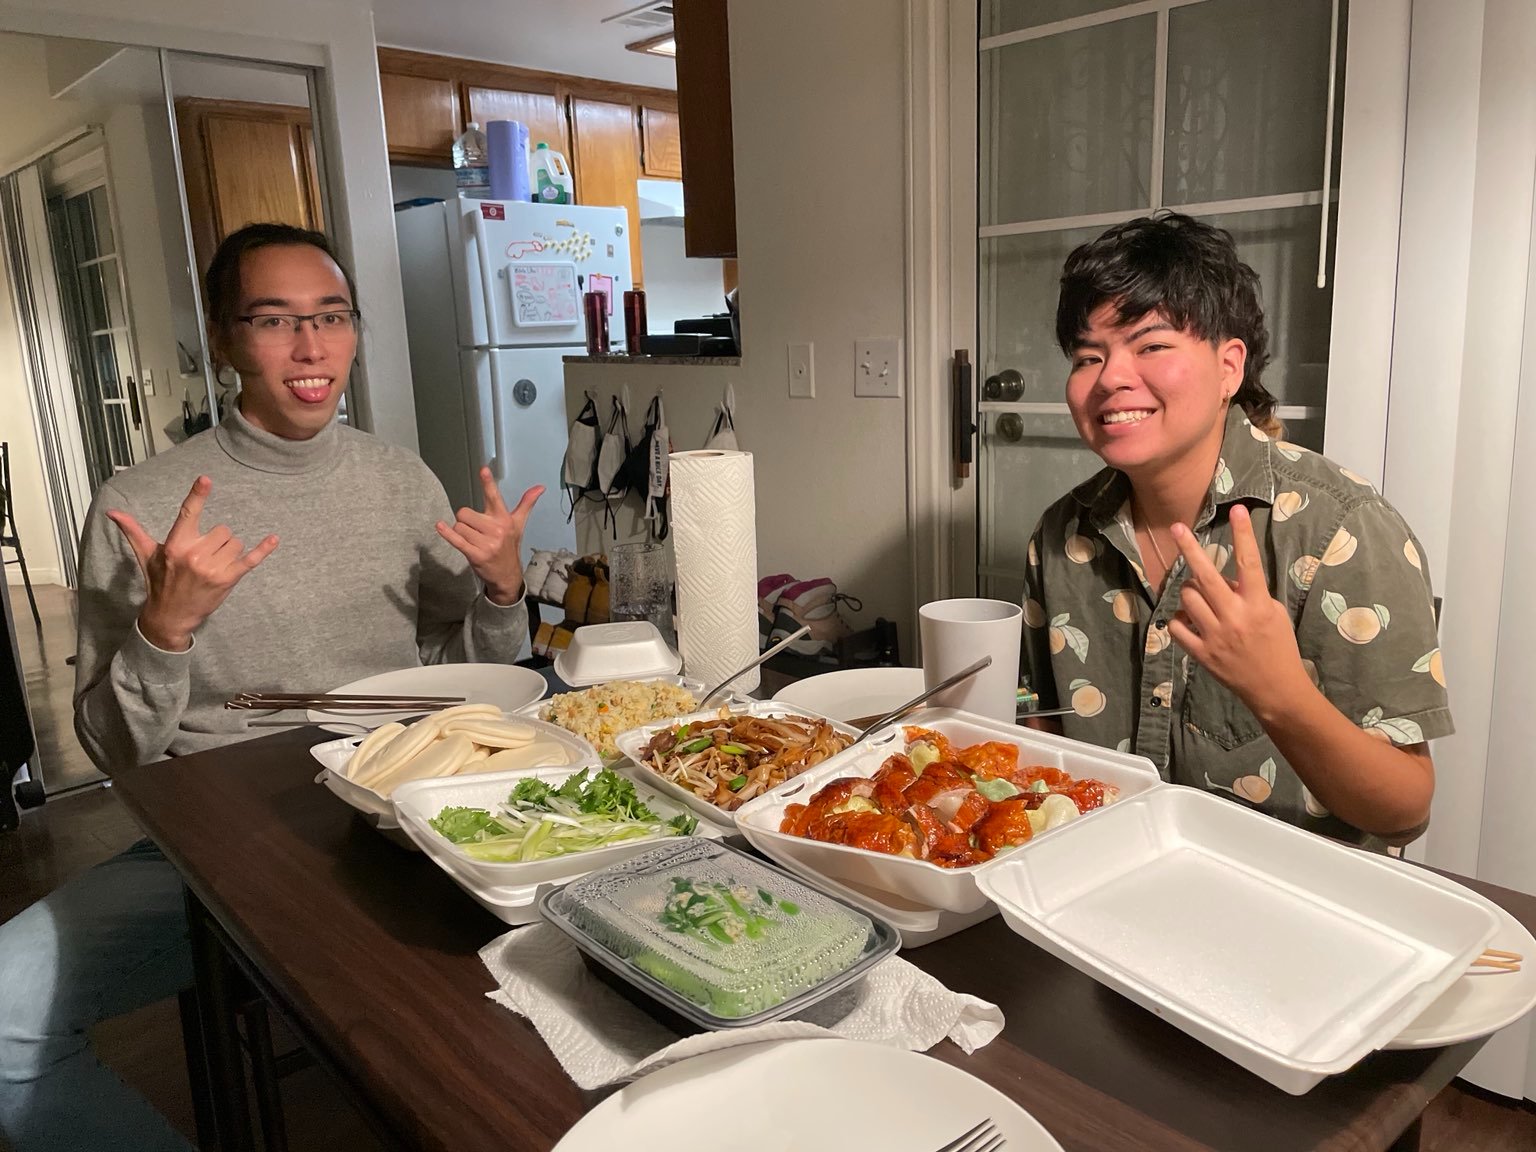 Thanksgiving with Quiana and her roommates, Mattie and Milo (right). Thanks to Quiana's family for ordering us food. One of my favorite nights of the semester.